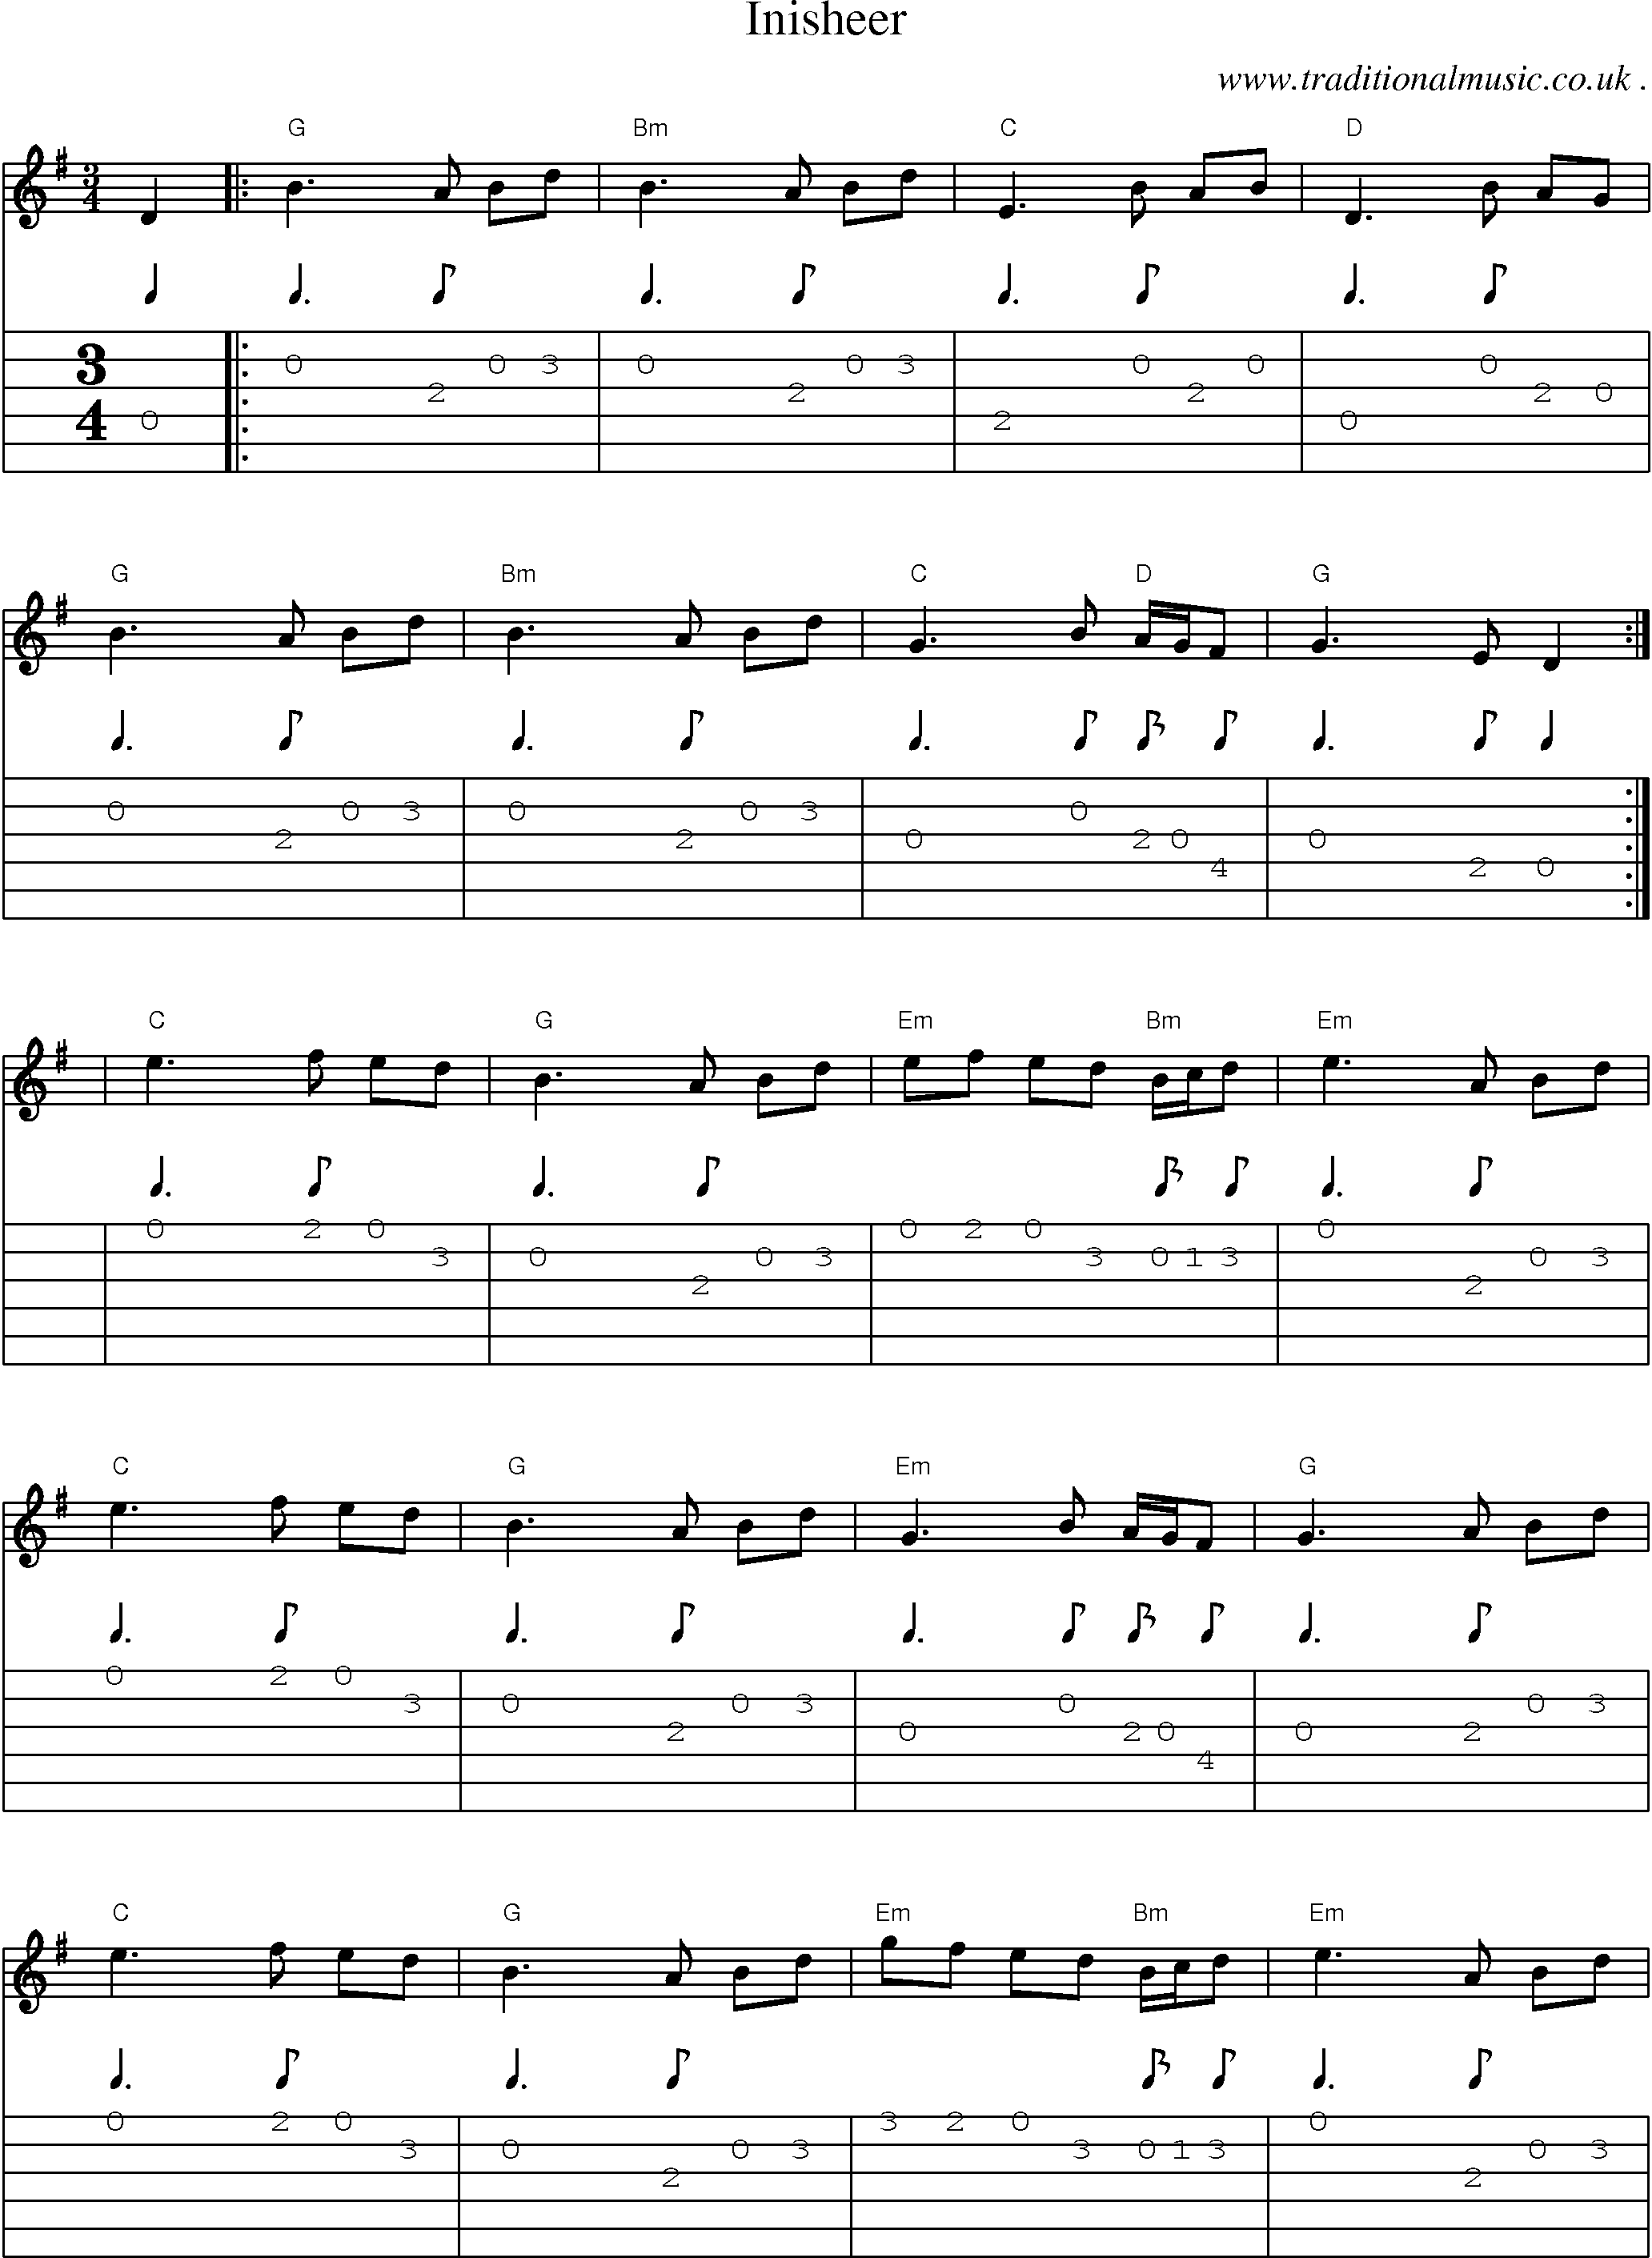 Music Score and Guitar Tabs for Inisheer